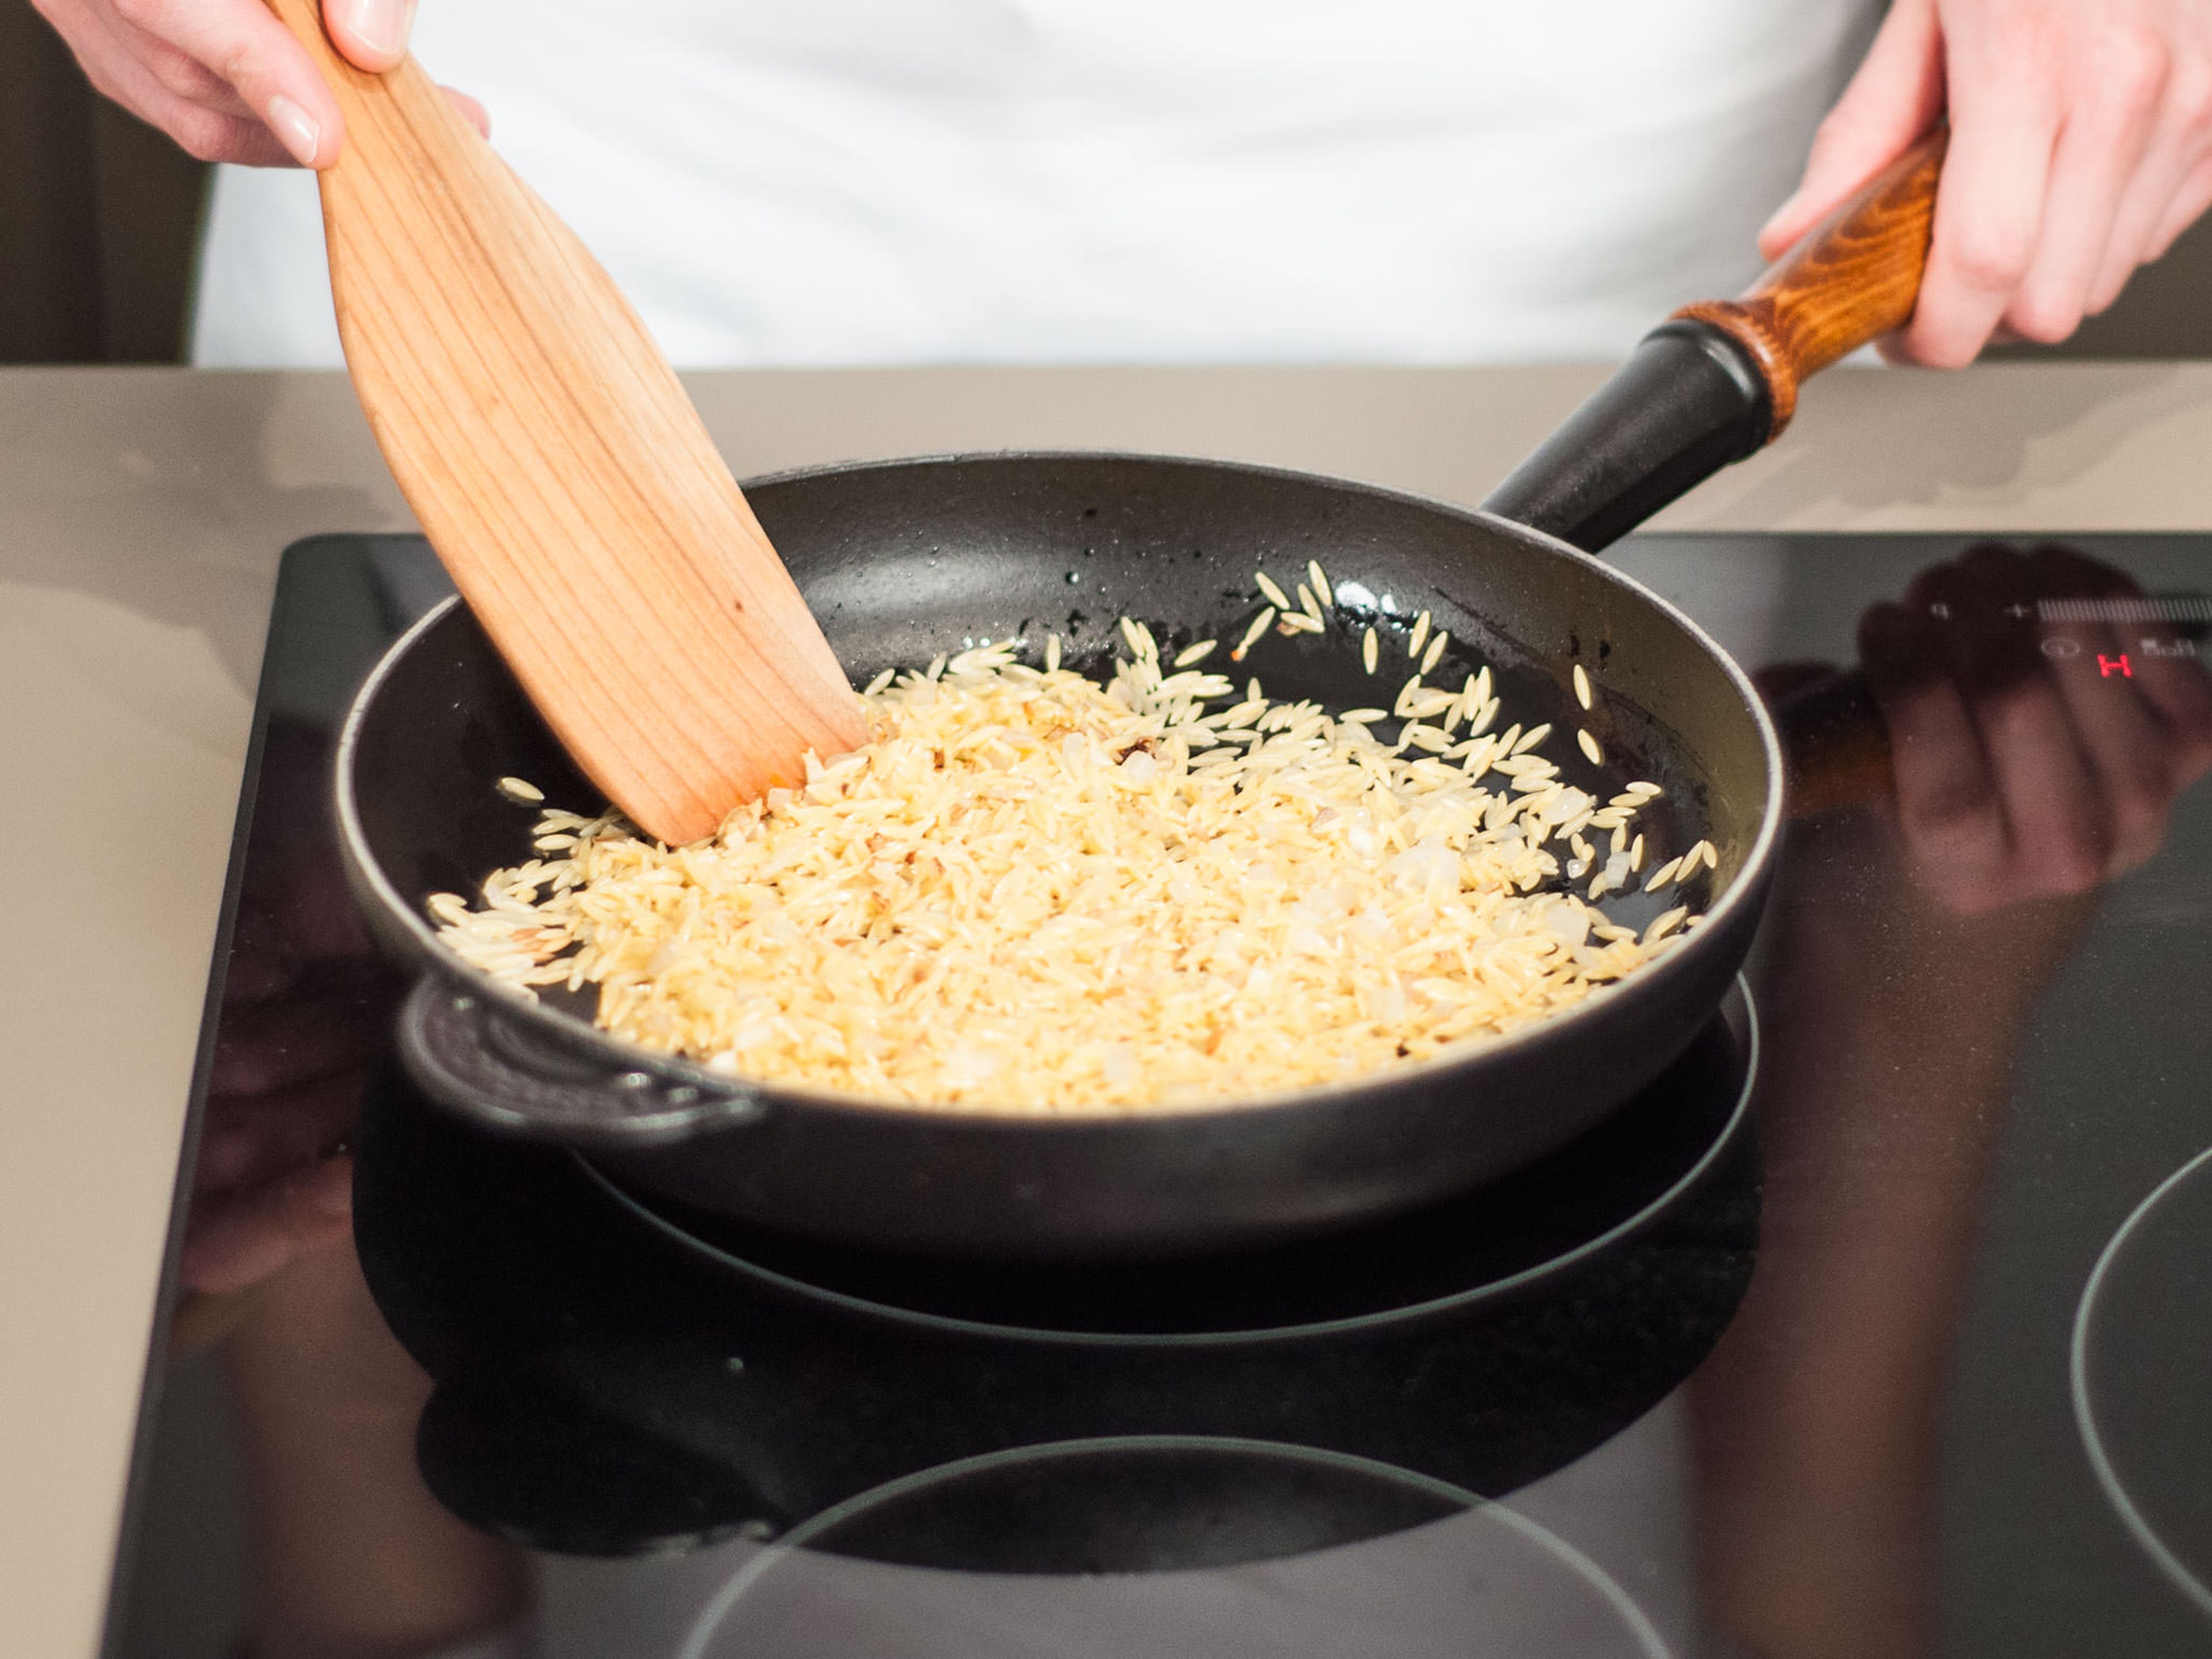 In a frying pan, sauté garlic and orzo in some vegetable oil over medium heat for approx. 3 – 5 min. Season with salt and pepper.